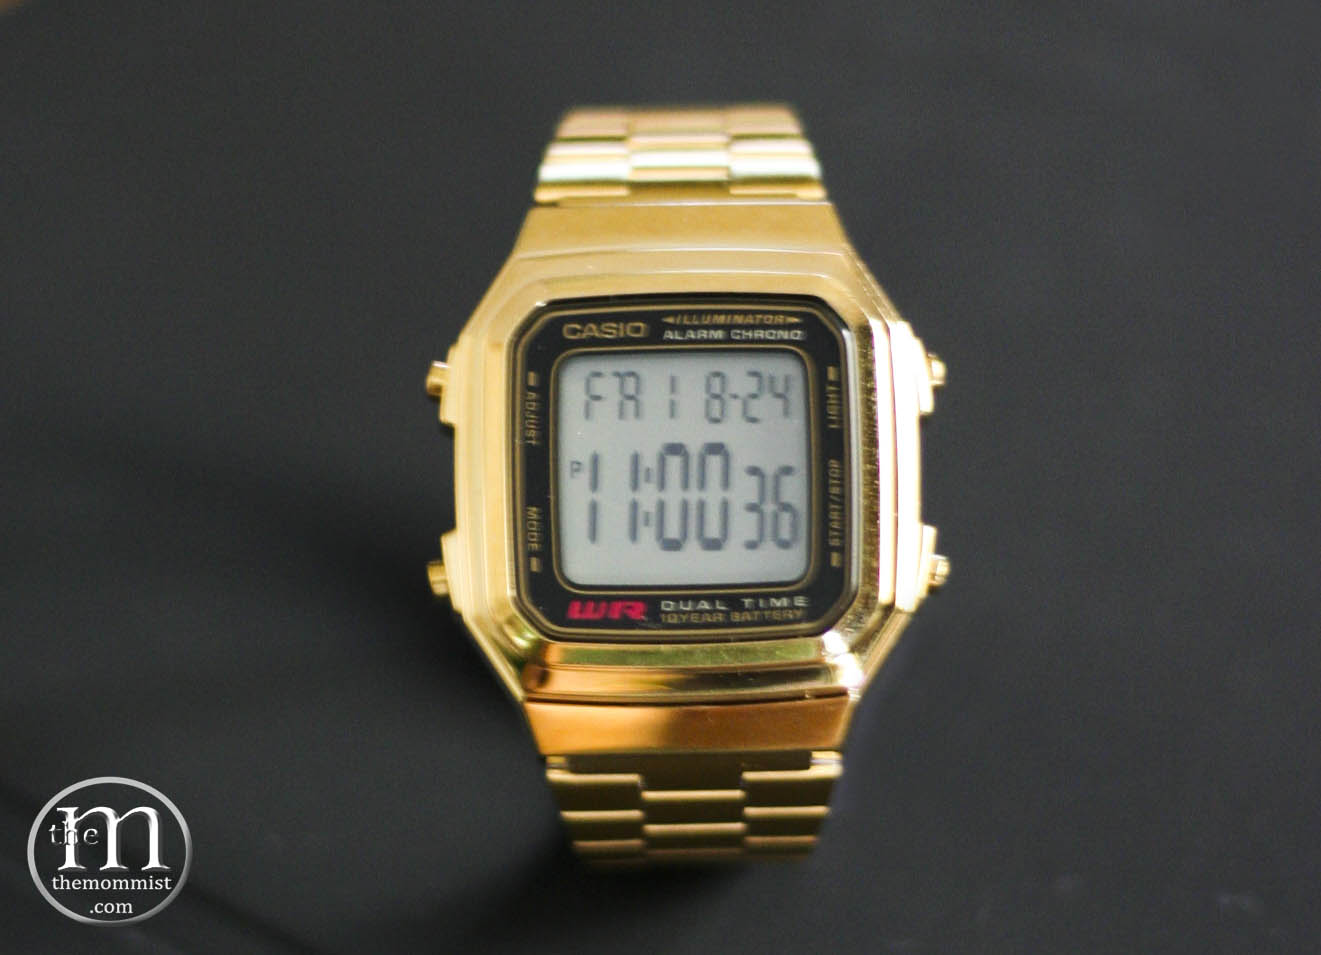 ... style and with a vengeance! Presenting, the Casio vintage gold watch